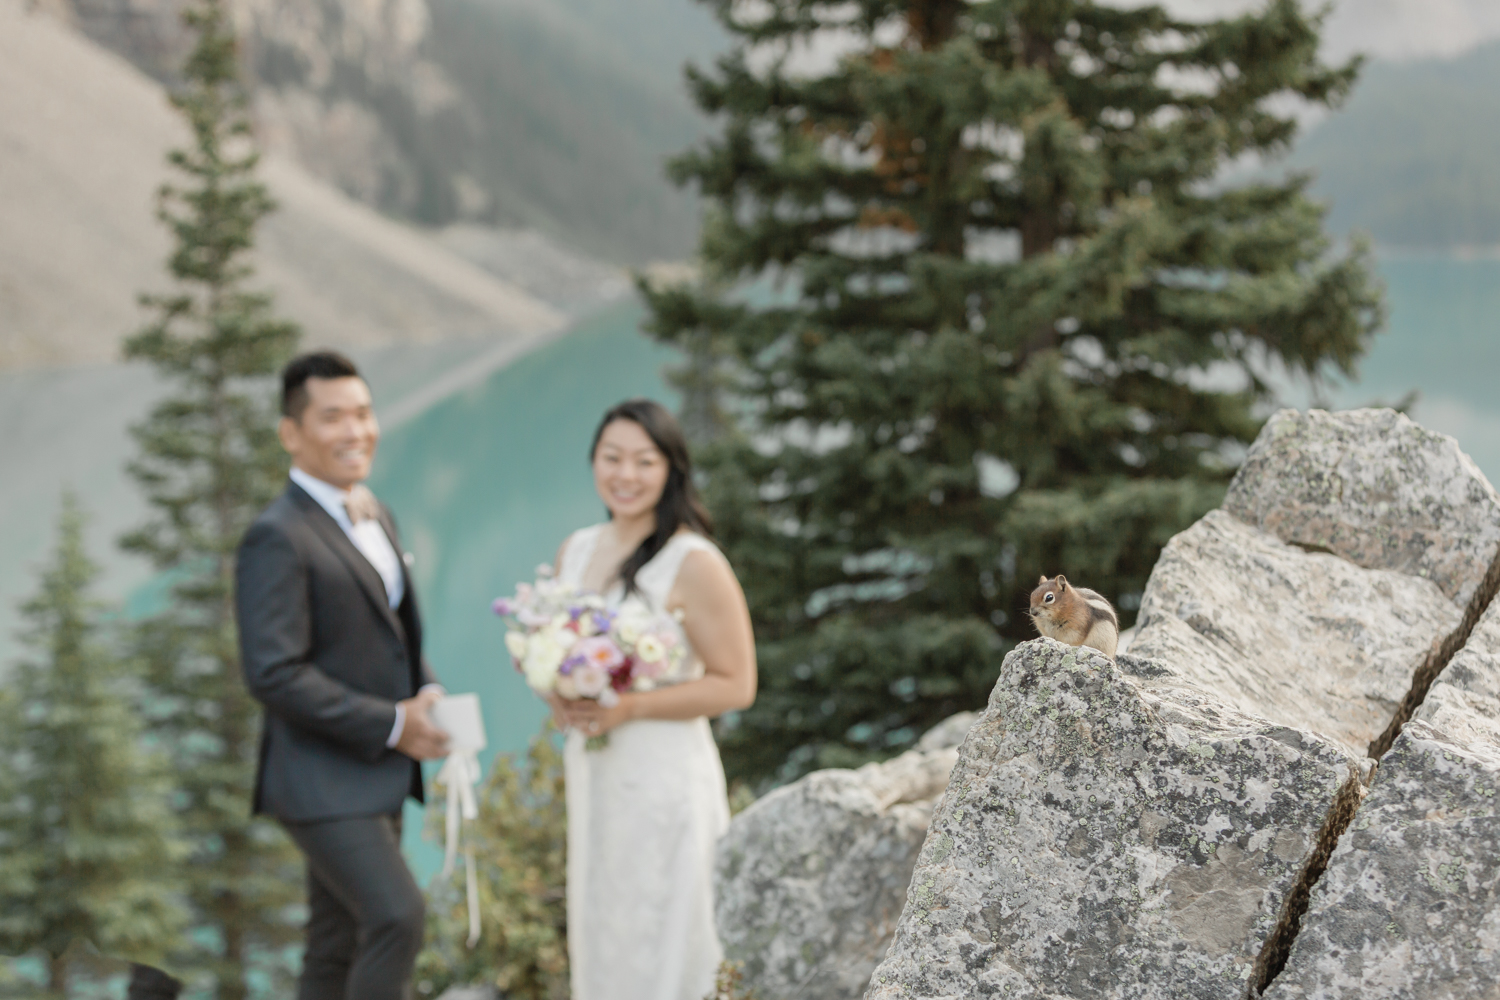 Elopement in Banff National Park couples ceremony with a chipmunk visitor